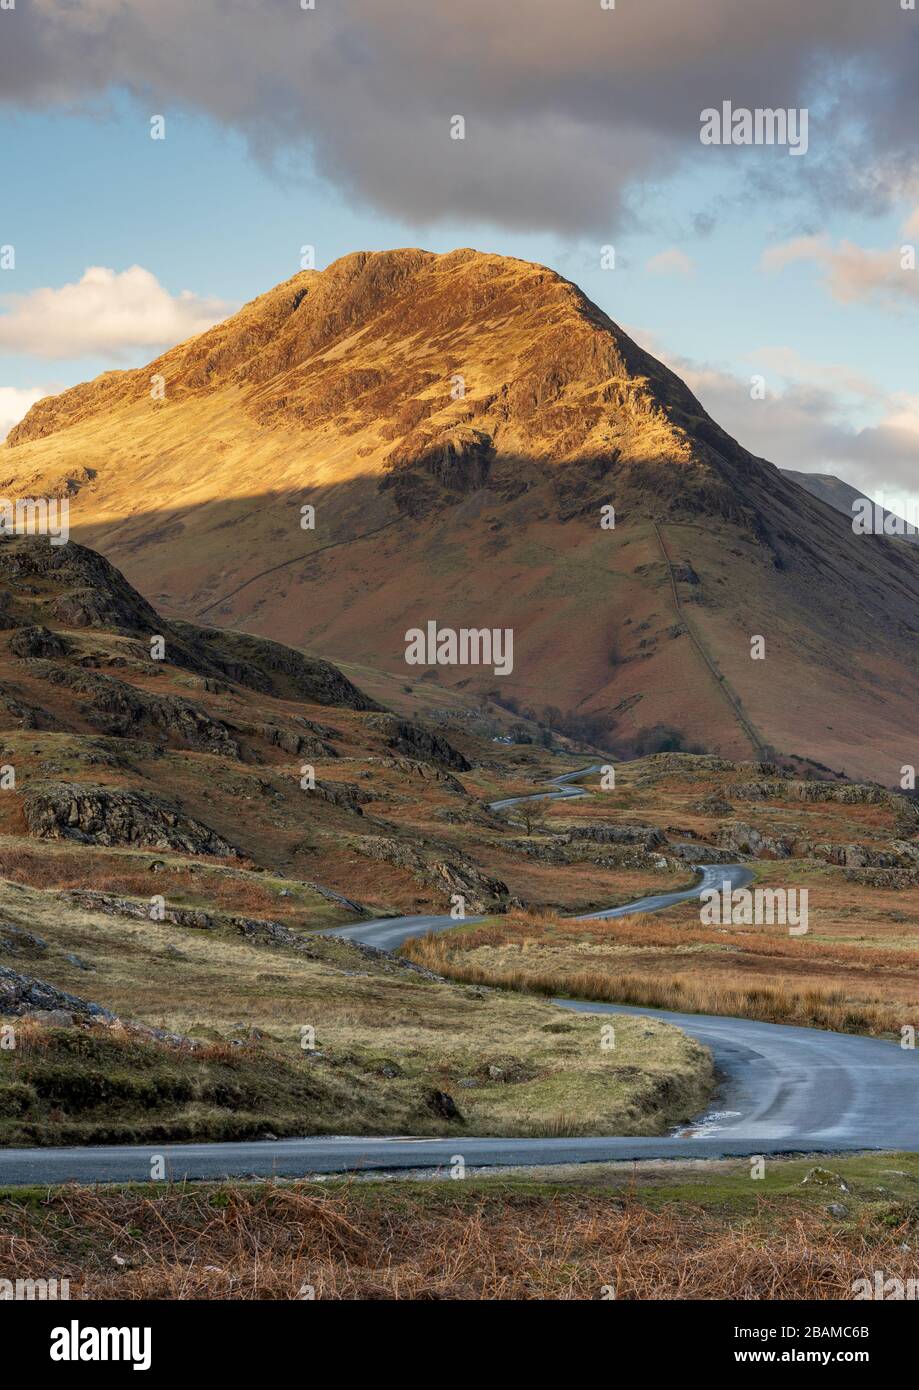 The prominent shape of Yewbarrow, a mountain in the English Lake District, captured in late afternoon as golden light highlights the summit. Stock Photo